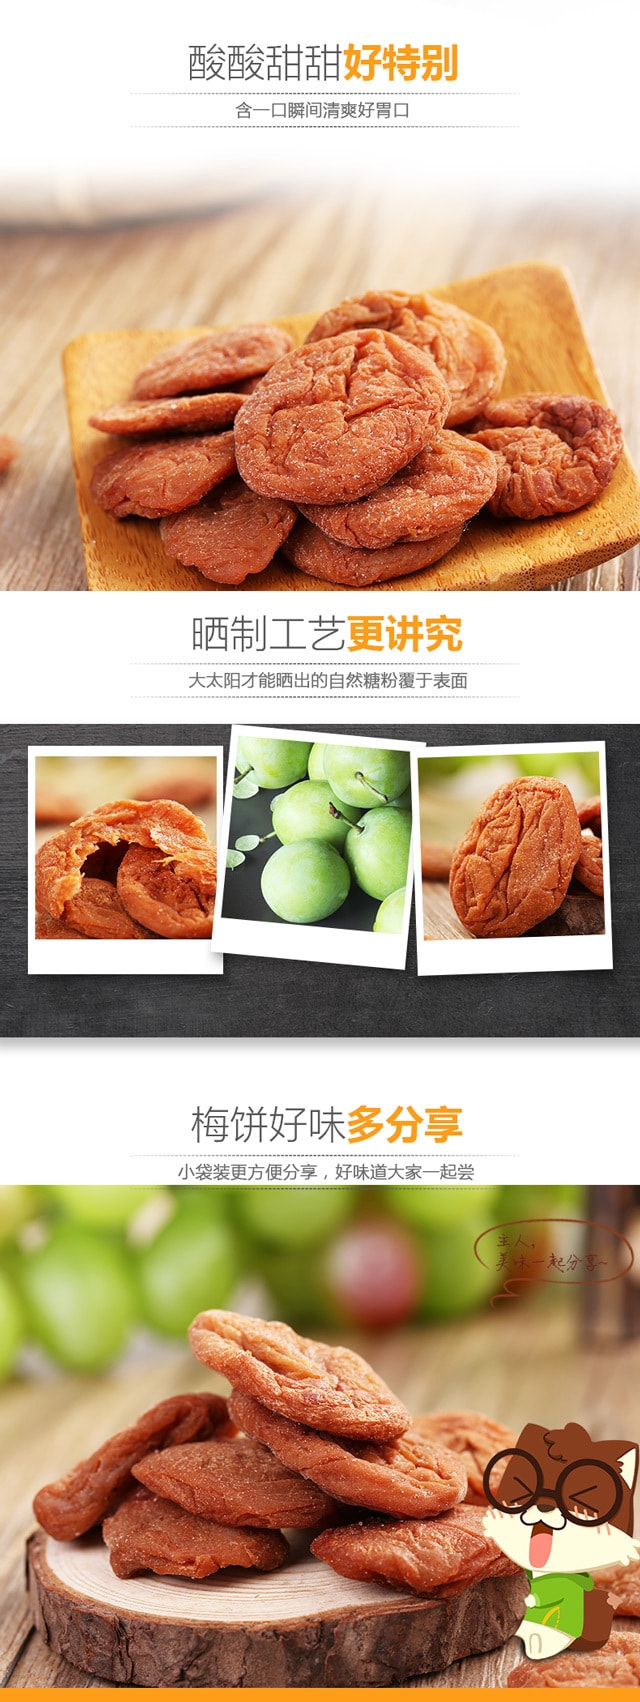 [China Direct Mail] Seedless Prune Cakes Casual Snacks 60g